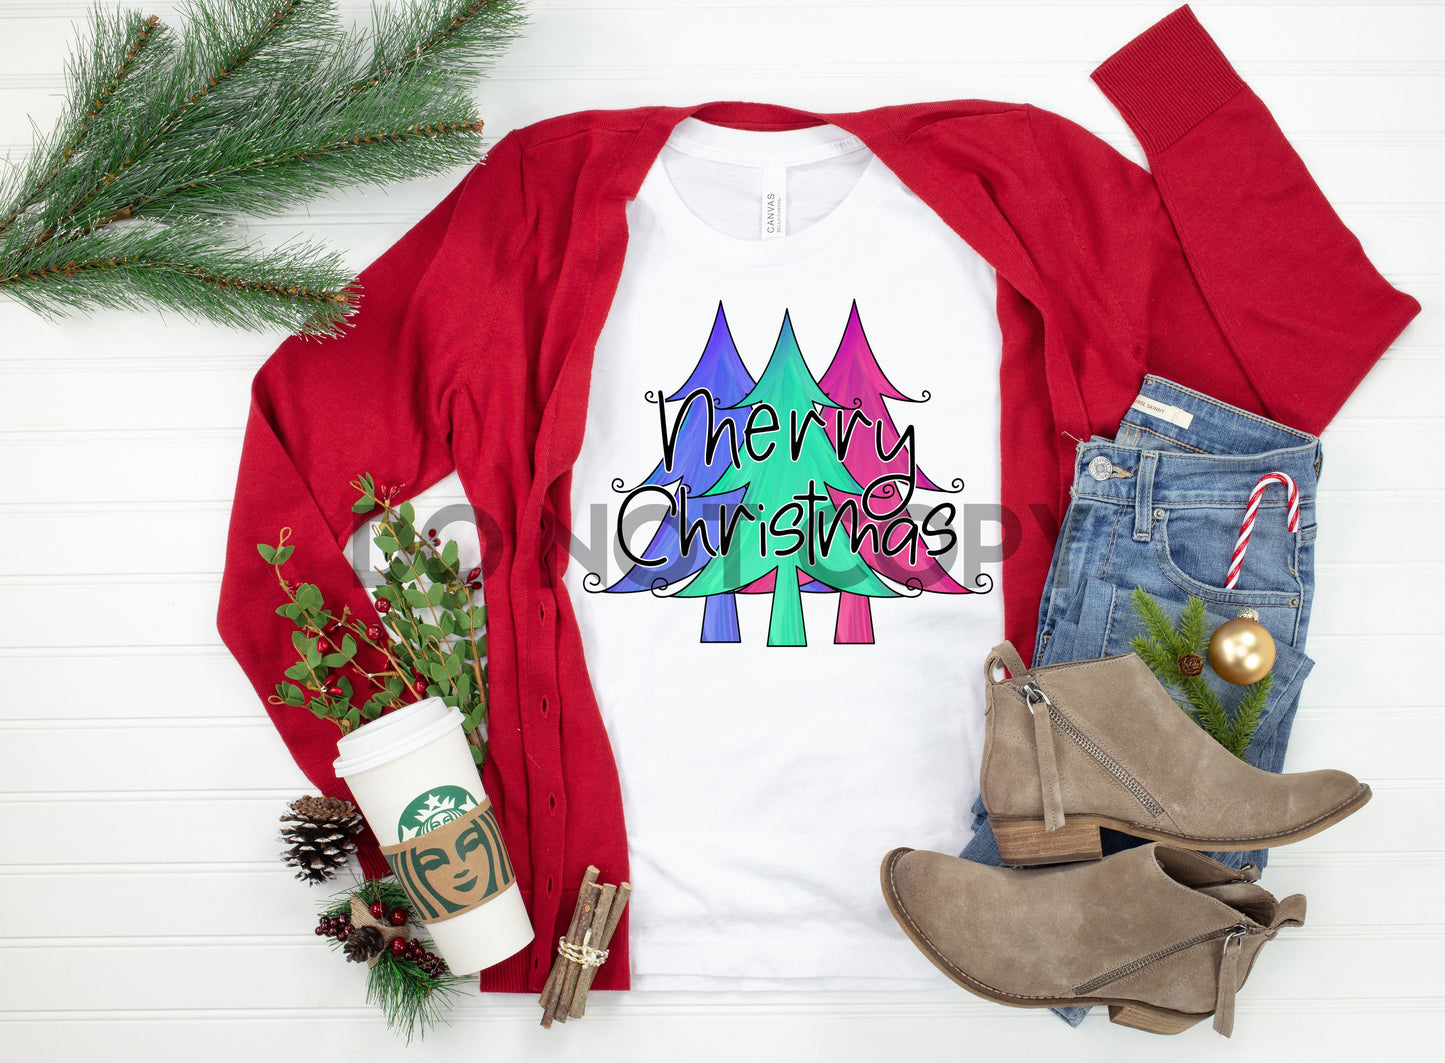 Merry Christmas Bright Trees Sublimation print